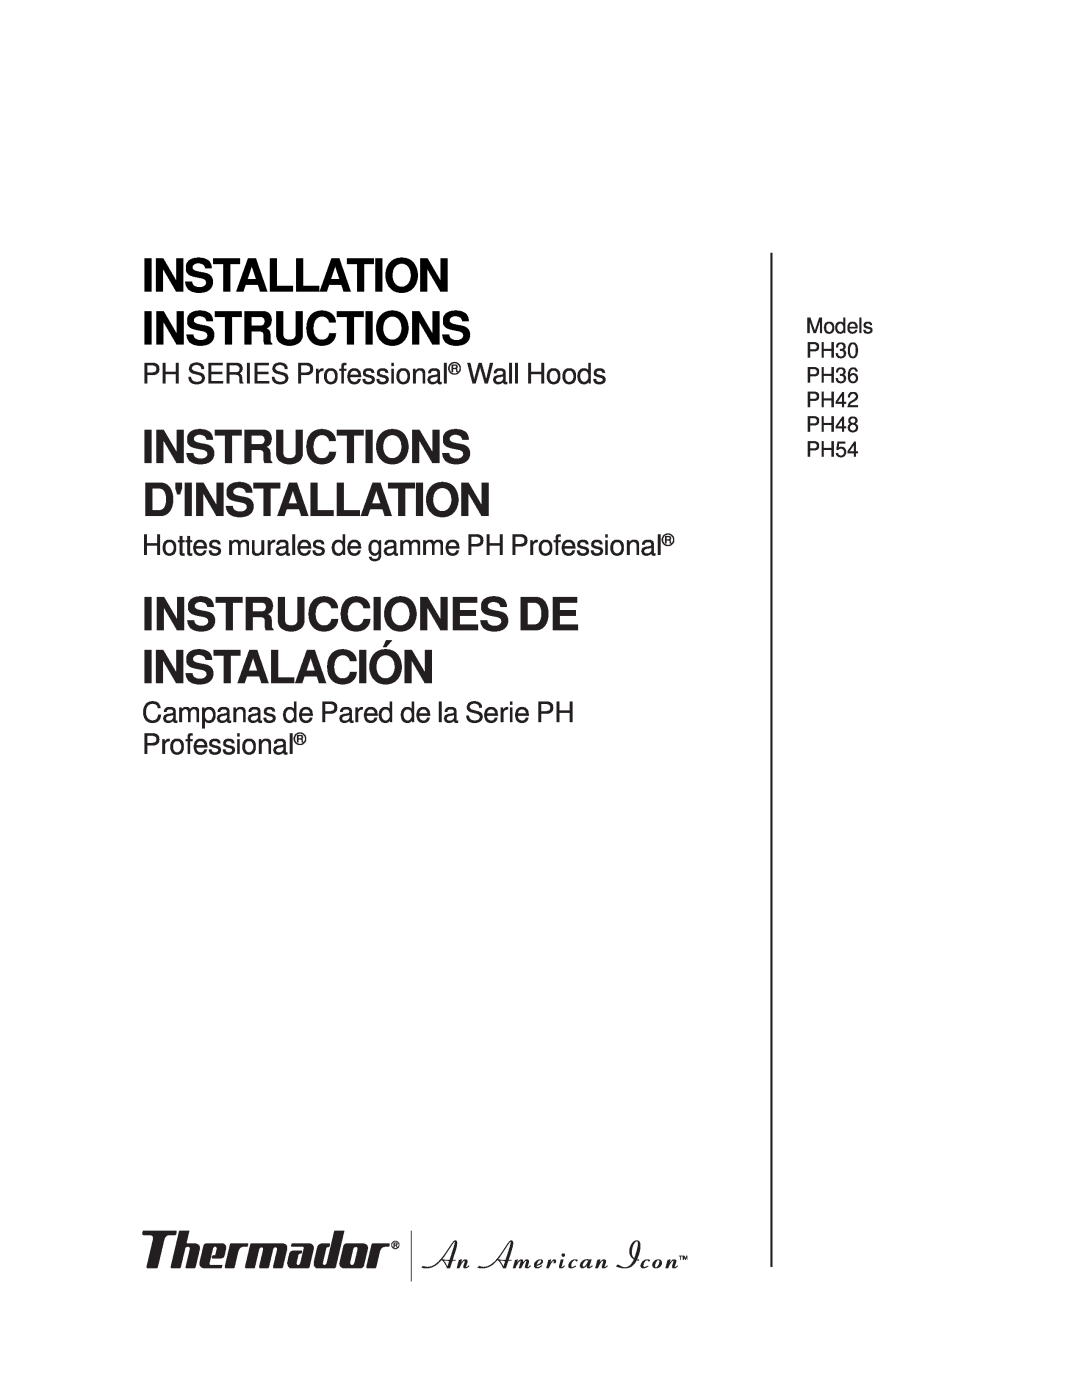 Thermador installation instructions Models PH30 PH36 PH42 PH48 PH54, Installation Instructions 